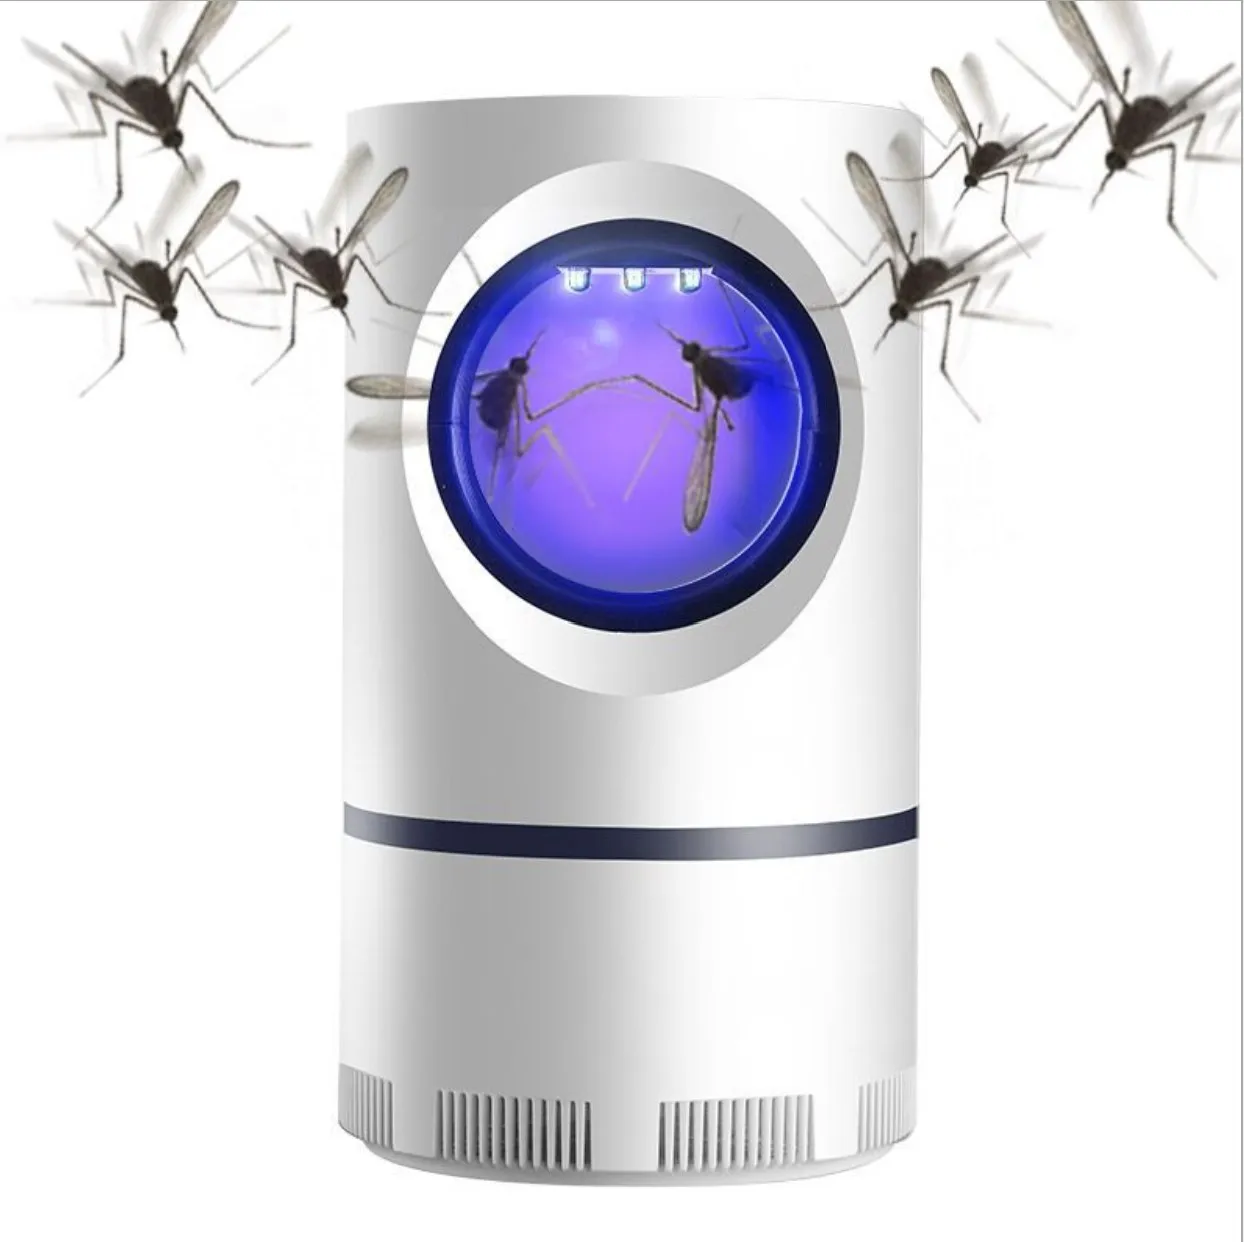 

Electric Mosquito Killer Lamp Radiationless Mosquito Killer Photocatalysis Mute Home LED Bug Zapper Insect Trap Anti Mosquito, White